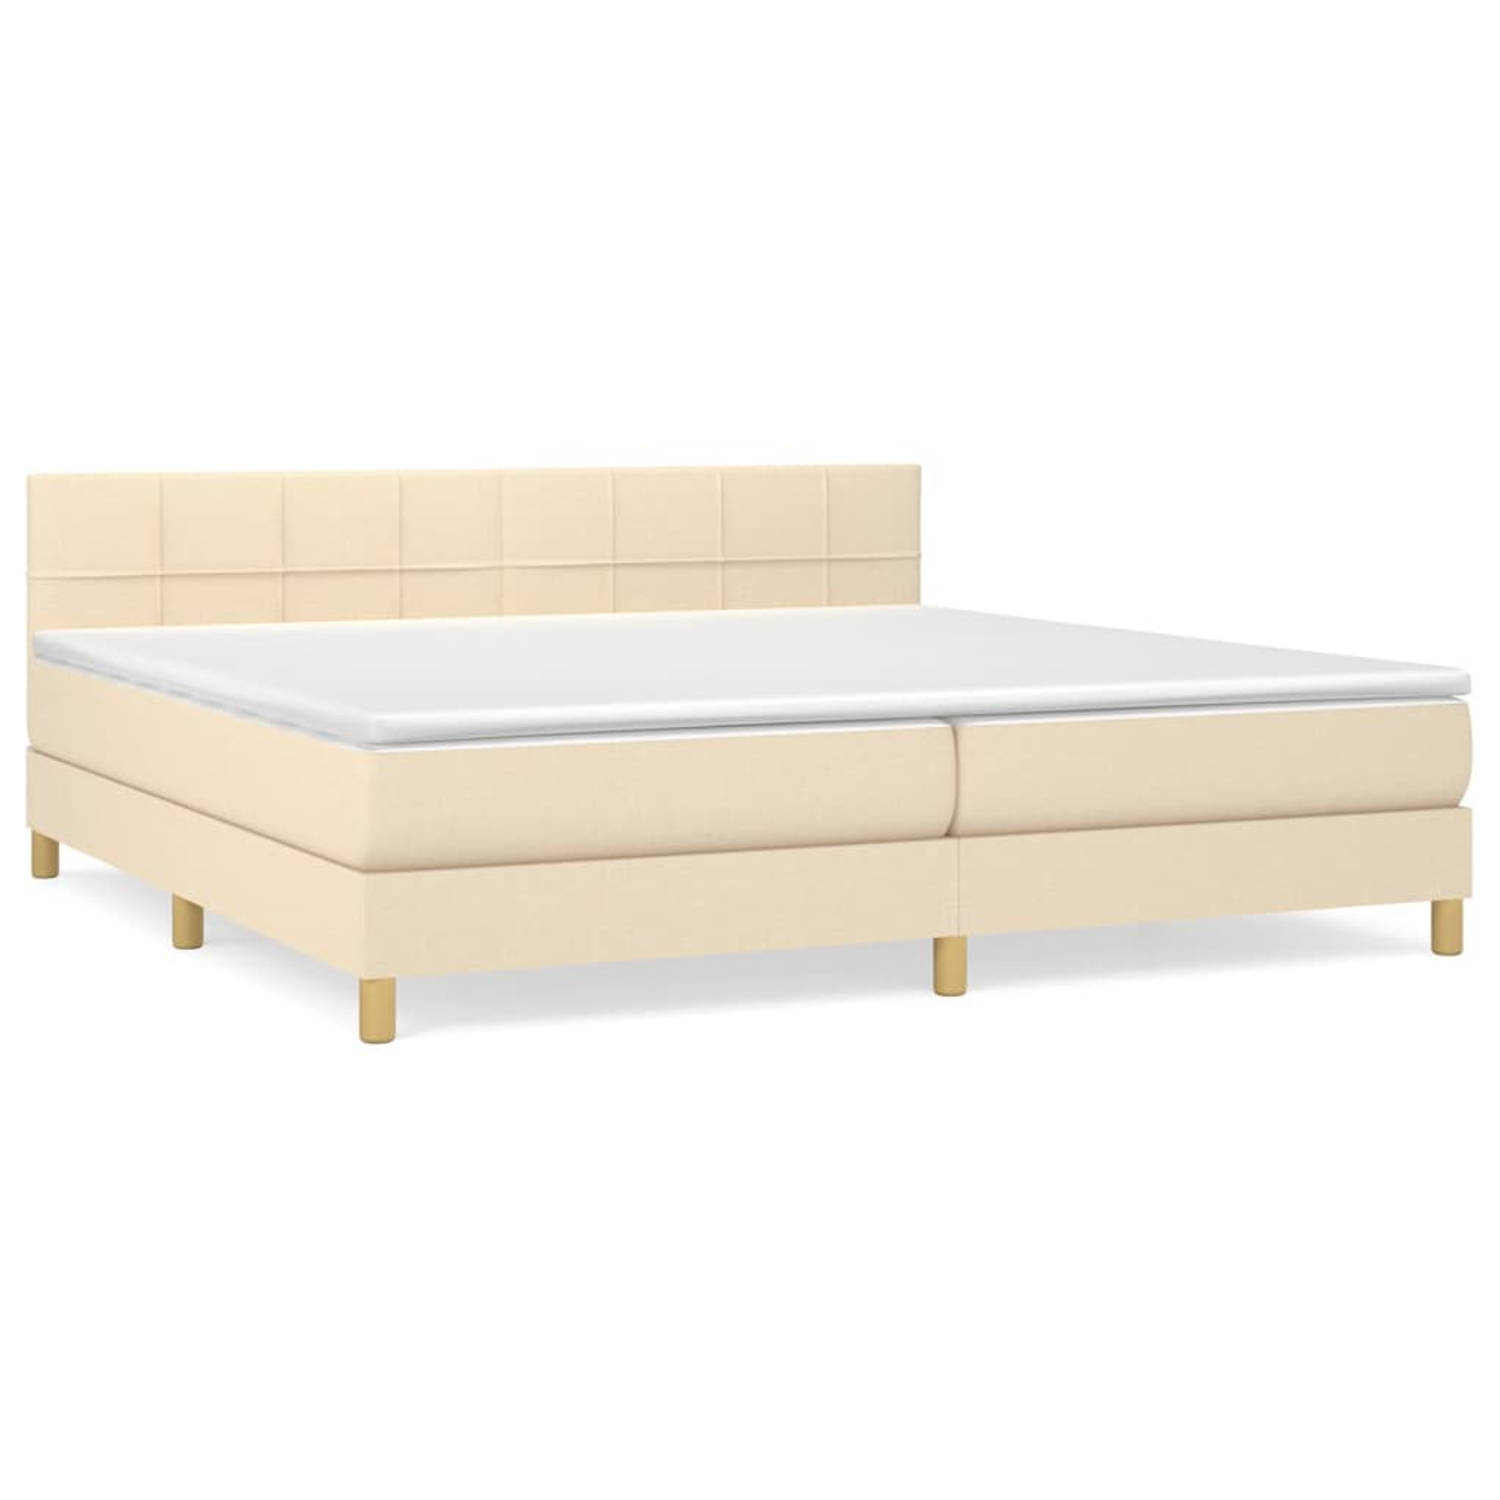 The Living Store Boxspringbed - Crème - Bed 203 x 200 x 78/88 cm - Pocketvering matras - Middelharde ondersteuning -